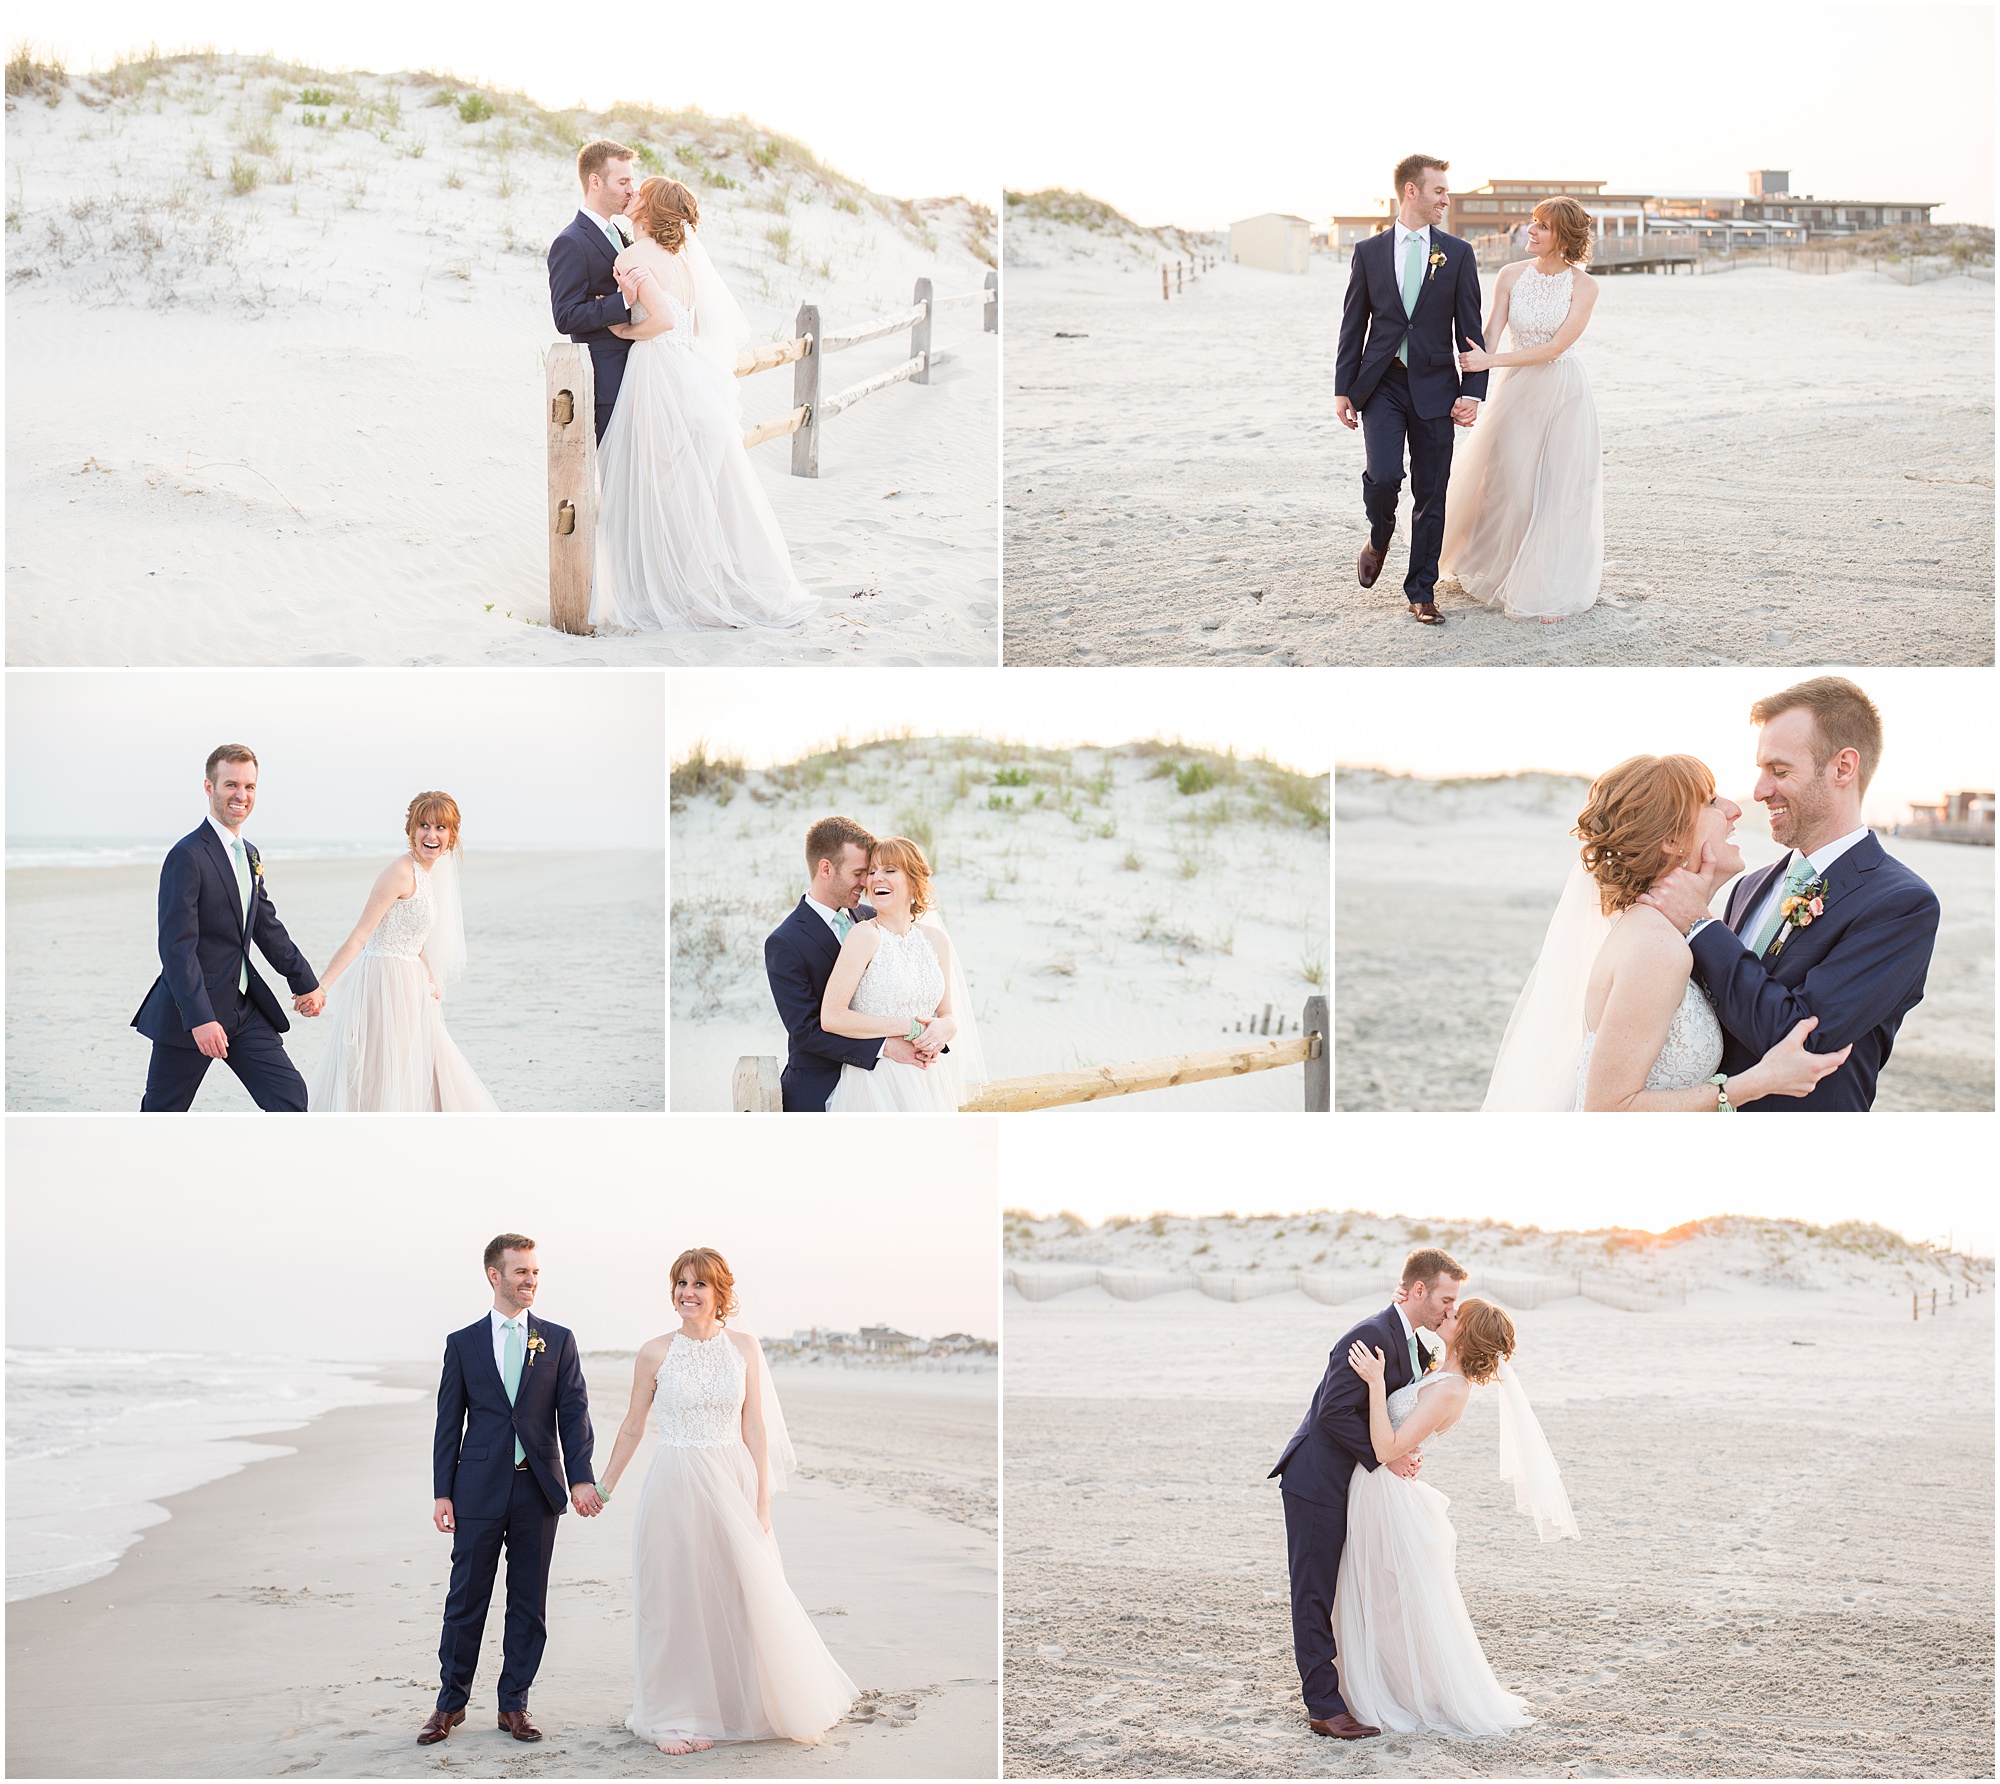 The golden hour light at The Windrift Hotel in Avalon makes it one of the best Jersey Shore wedding venues